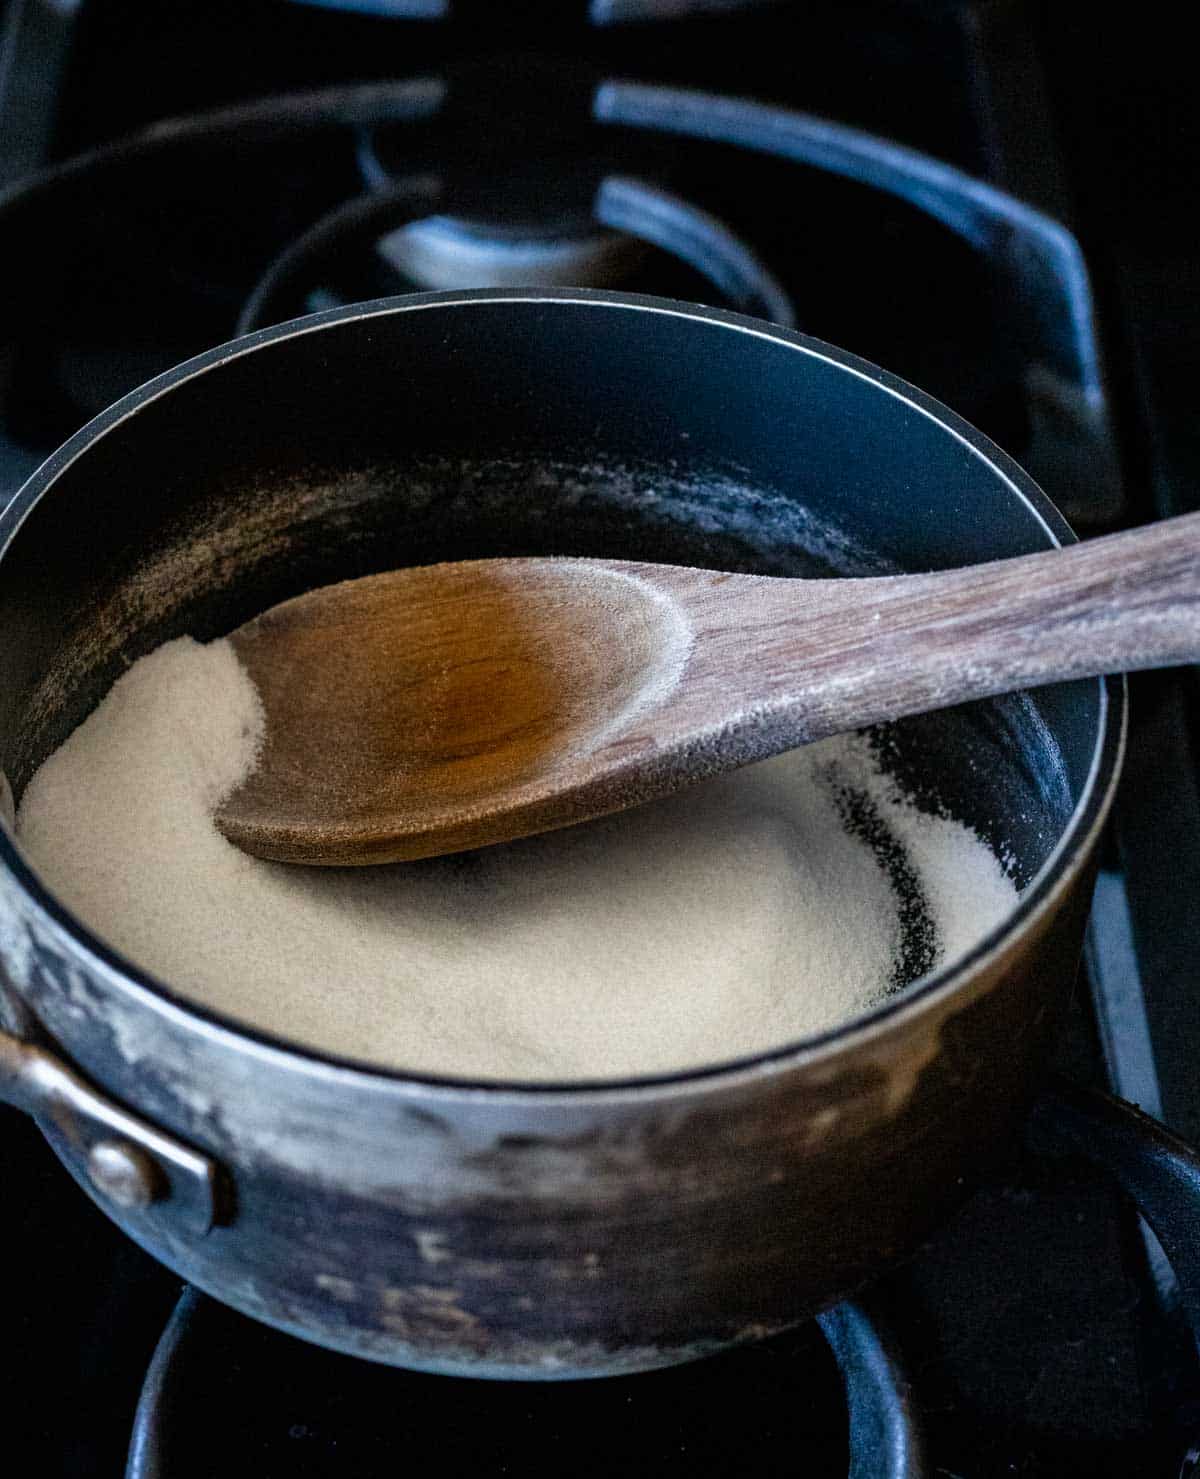 Granulated sugar being stirred around in a sauce pan with a wooden spoon.